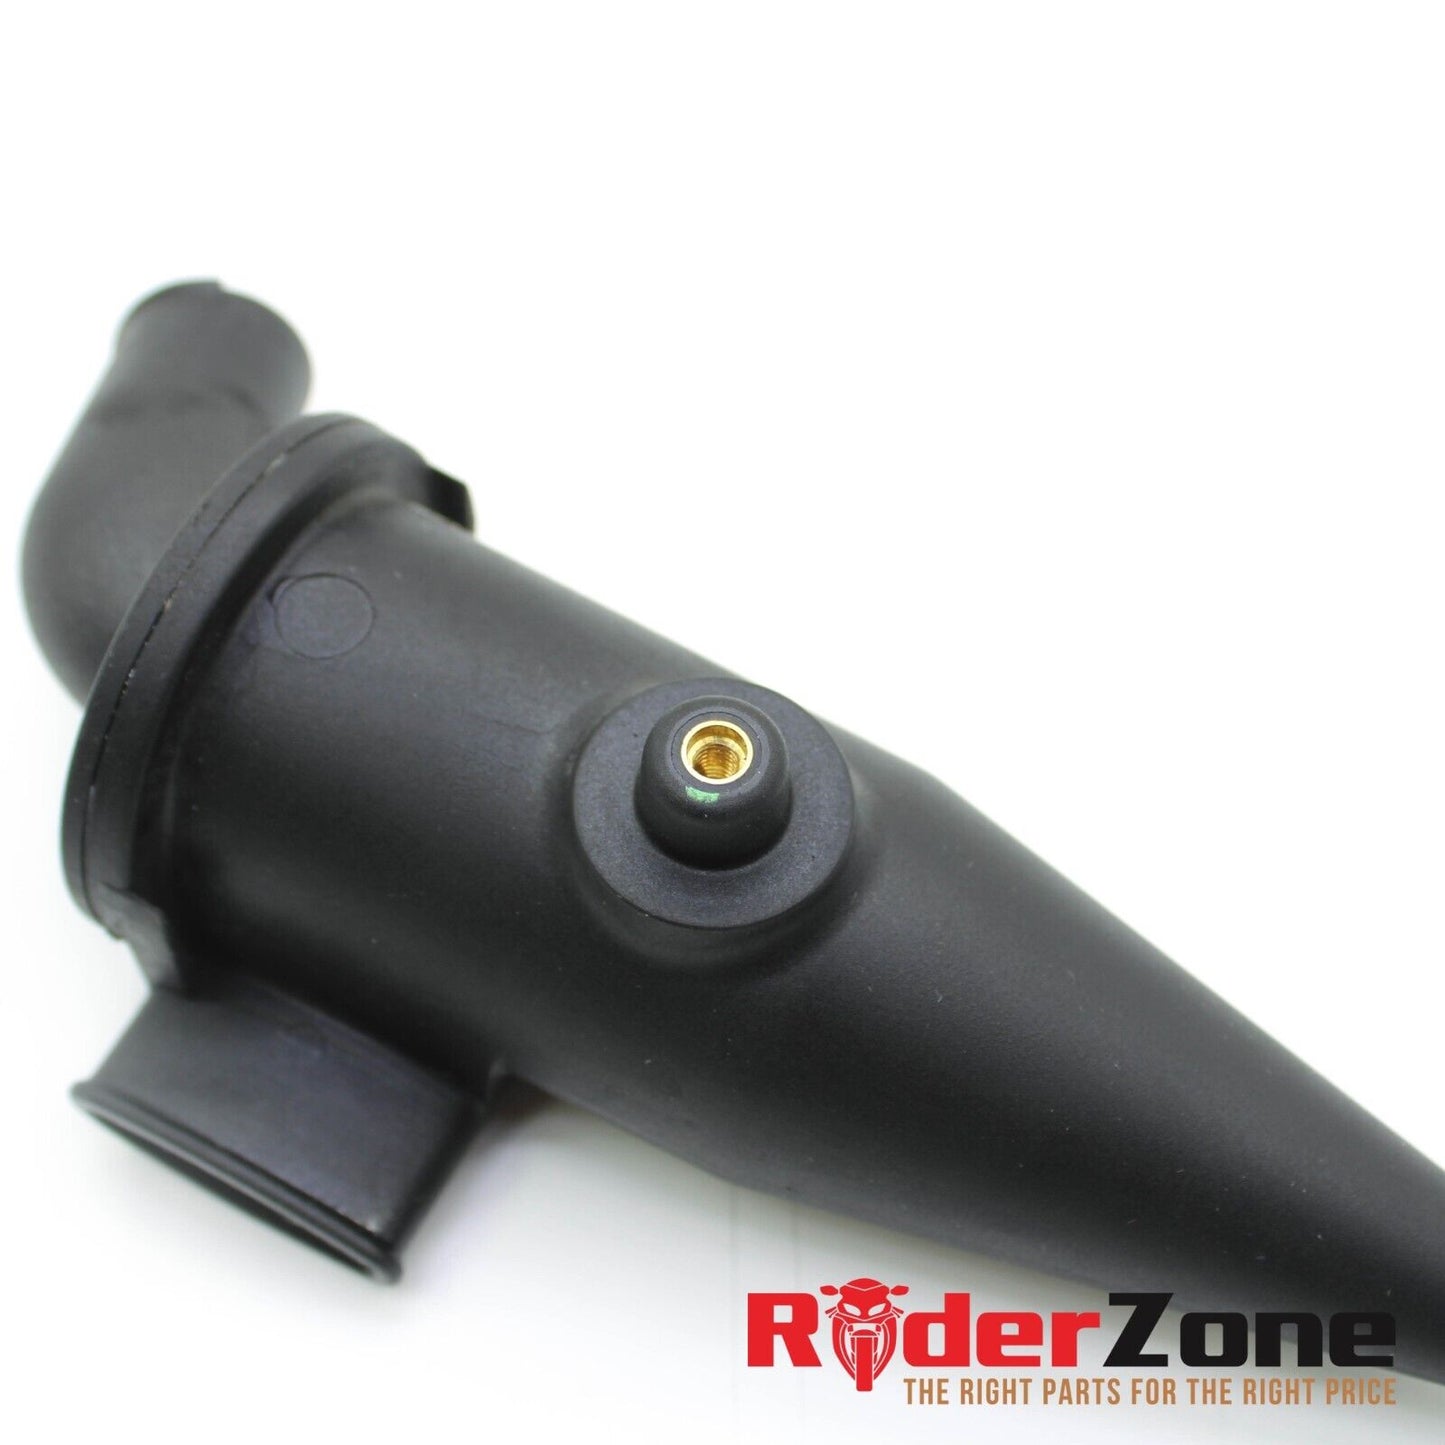 2018 - 2020 DUCATI PANIGALE V4 CYCLONE SEPARATOR AIR BREATHER BLACK SWITCH